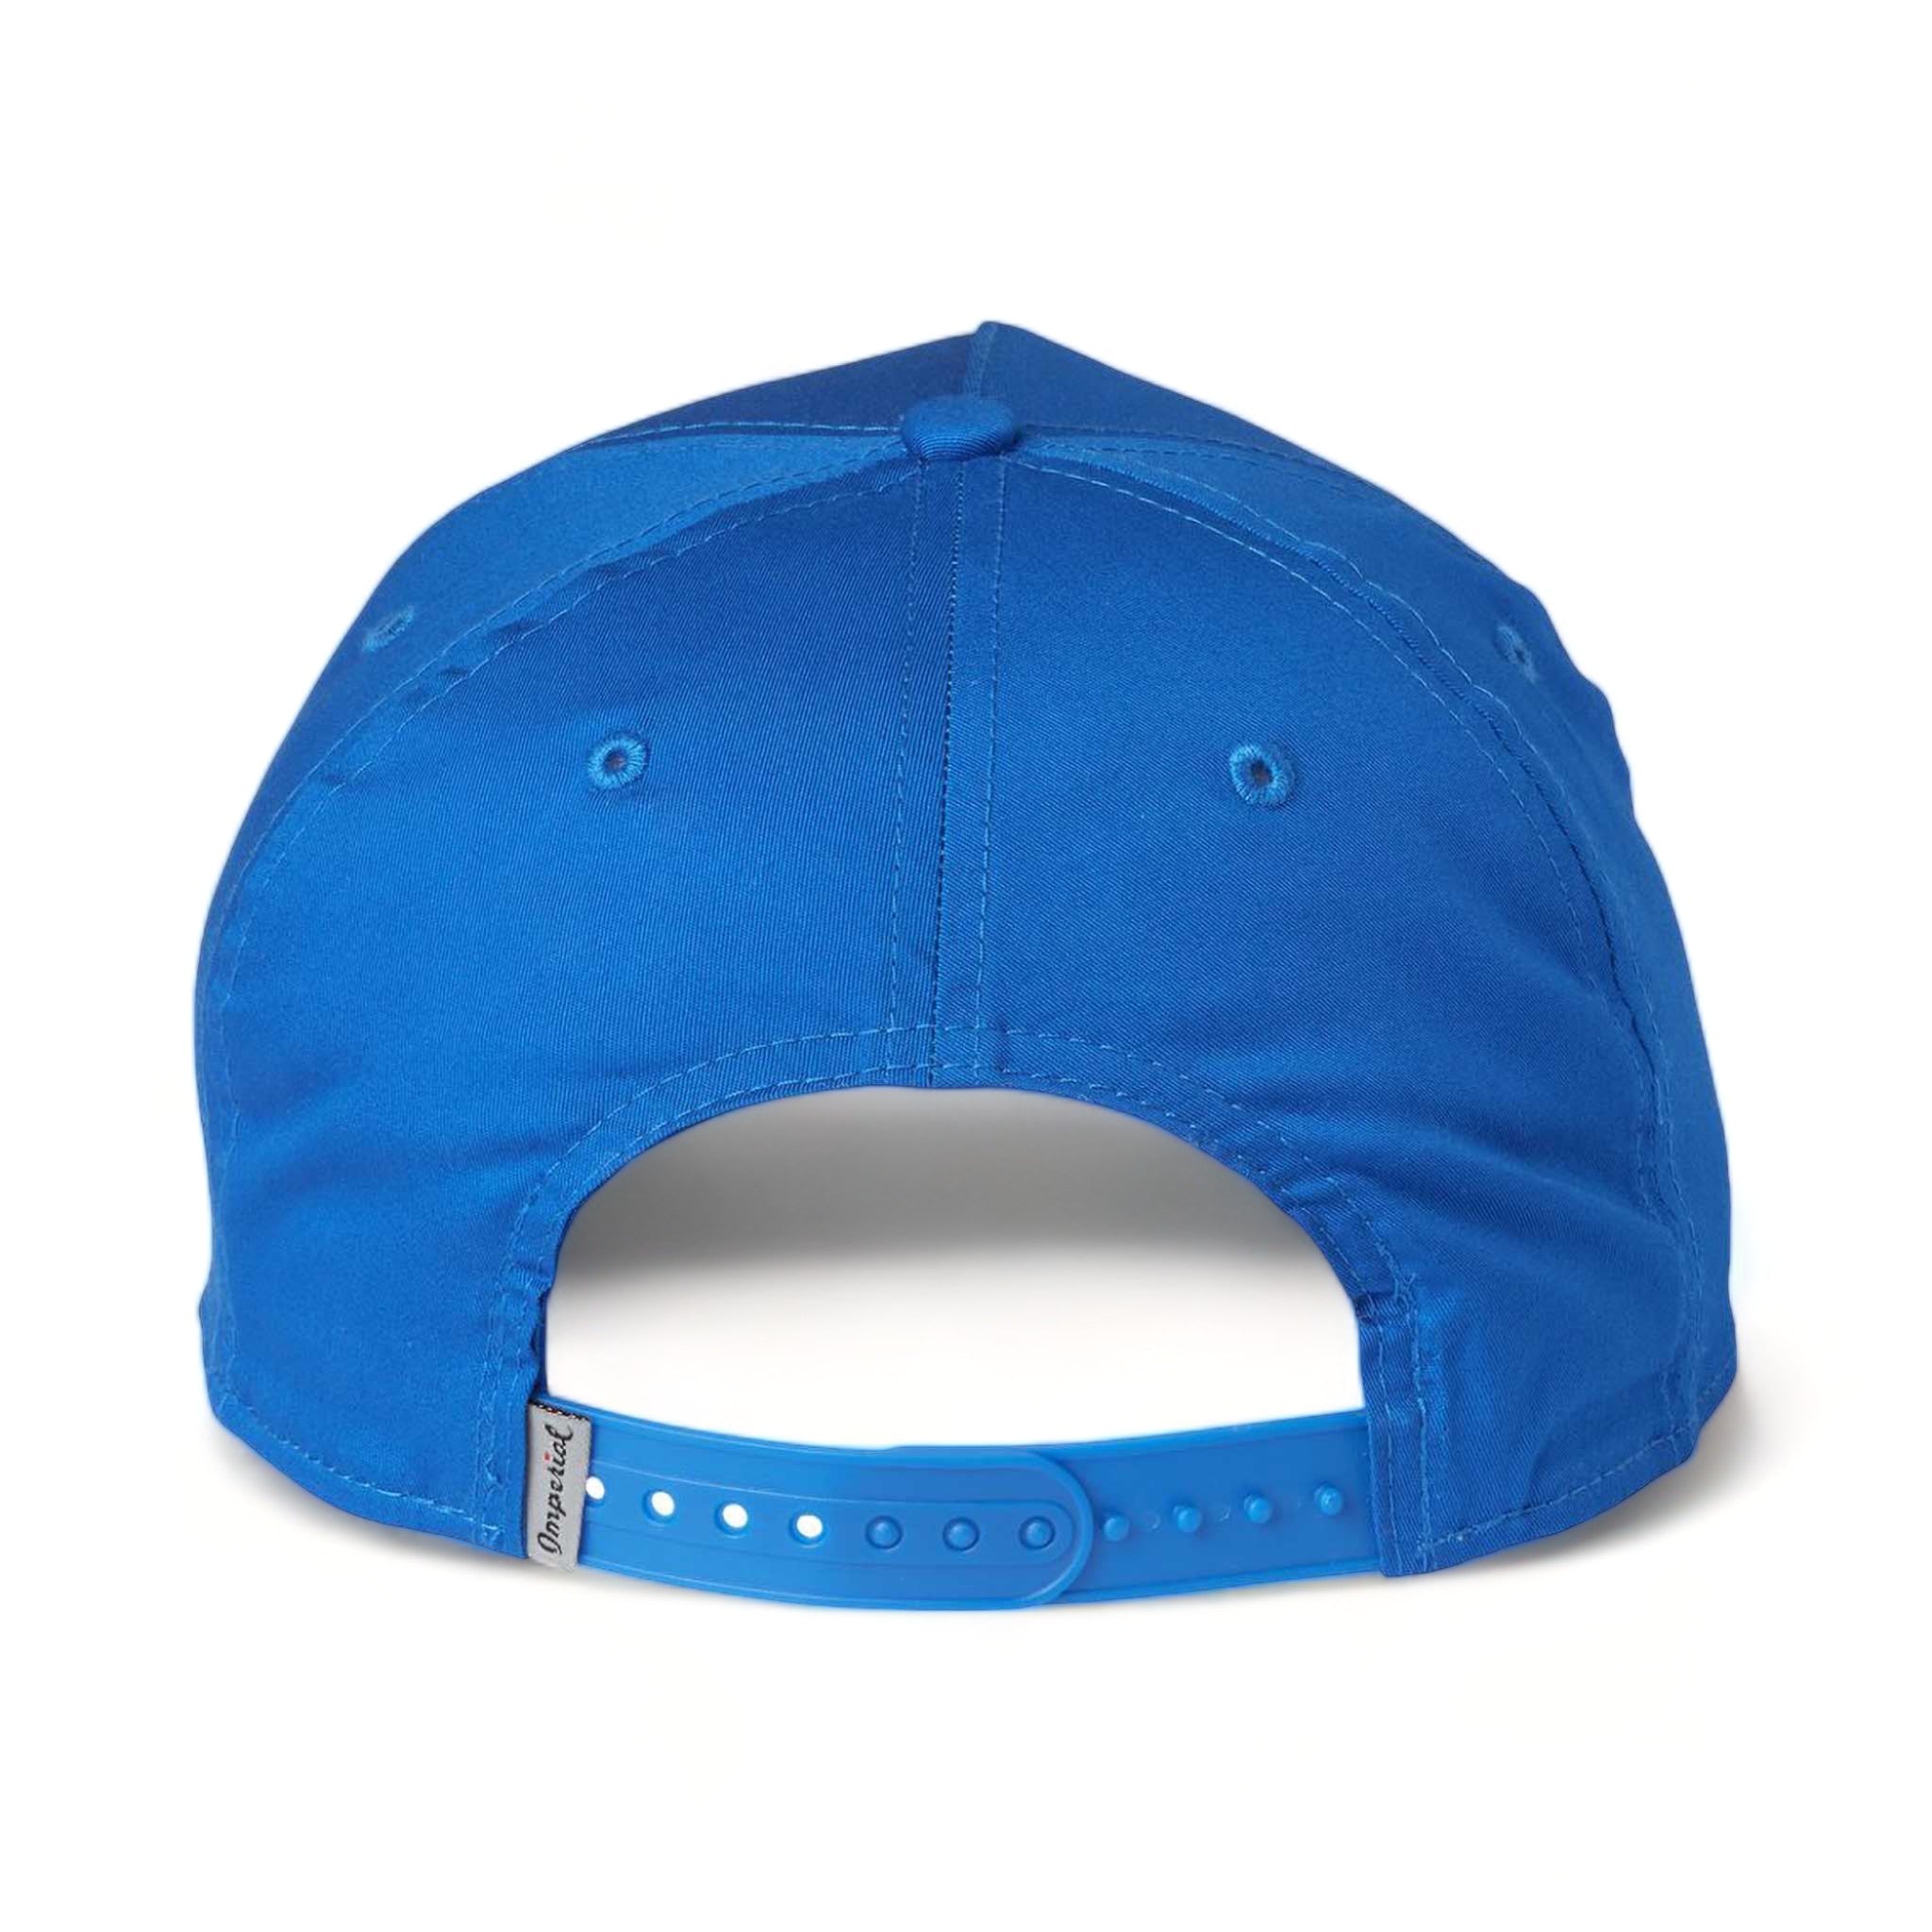 Back view of Imperial 5056 custom hat in royal and white